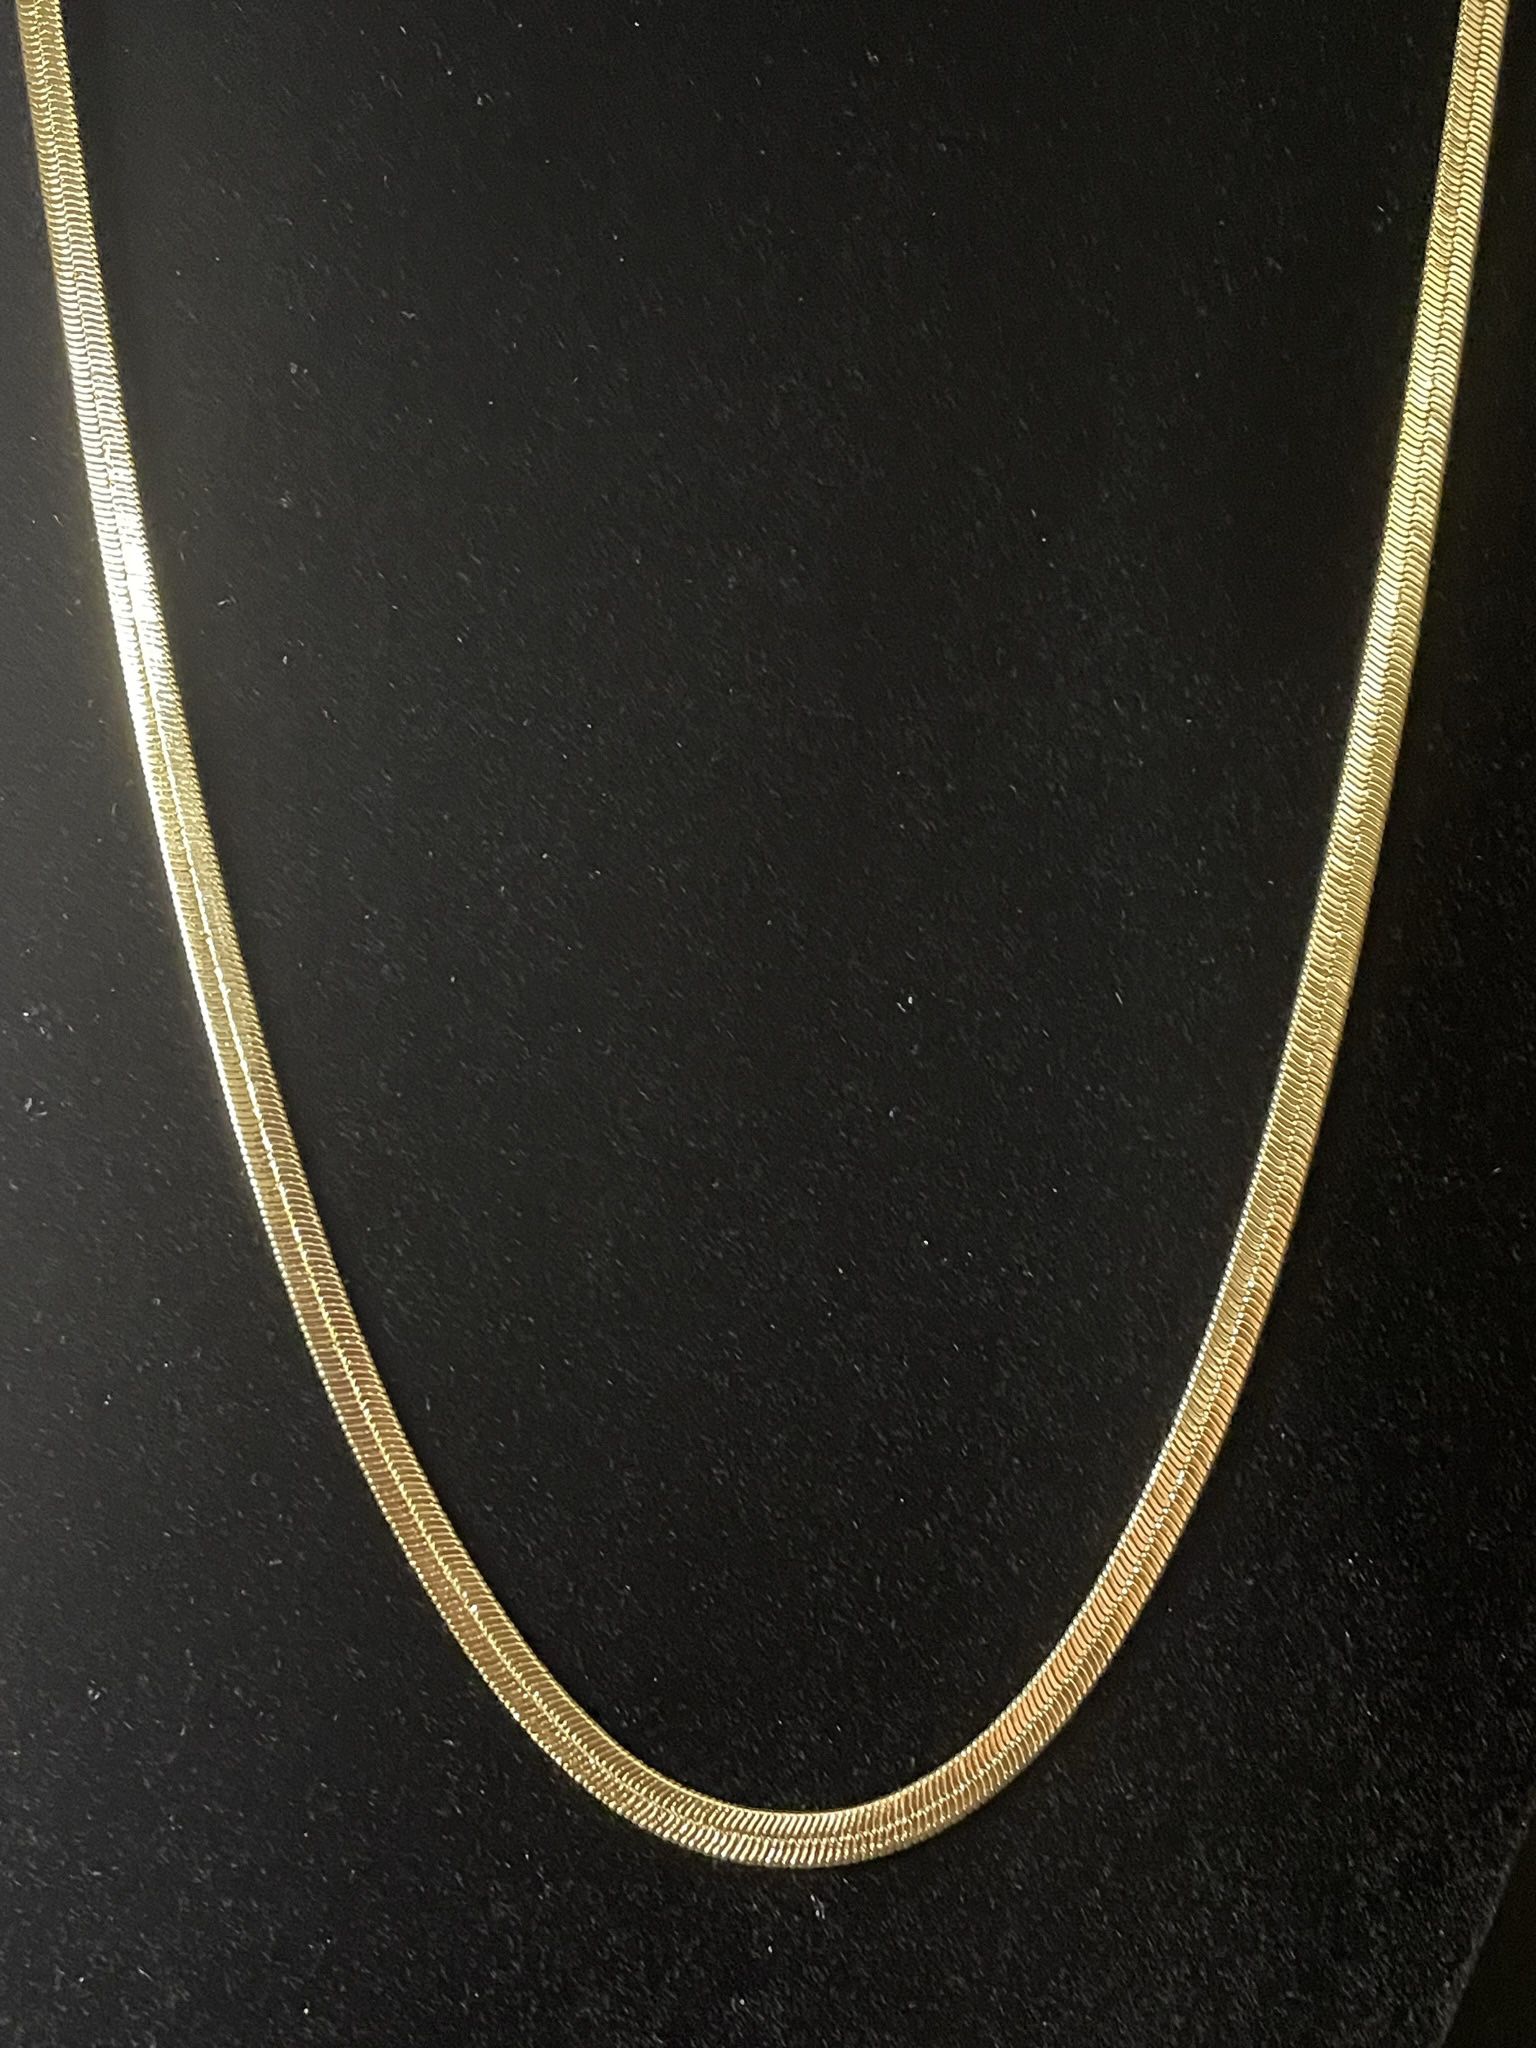 14k Gold Plated Chain 22in.